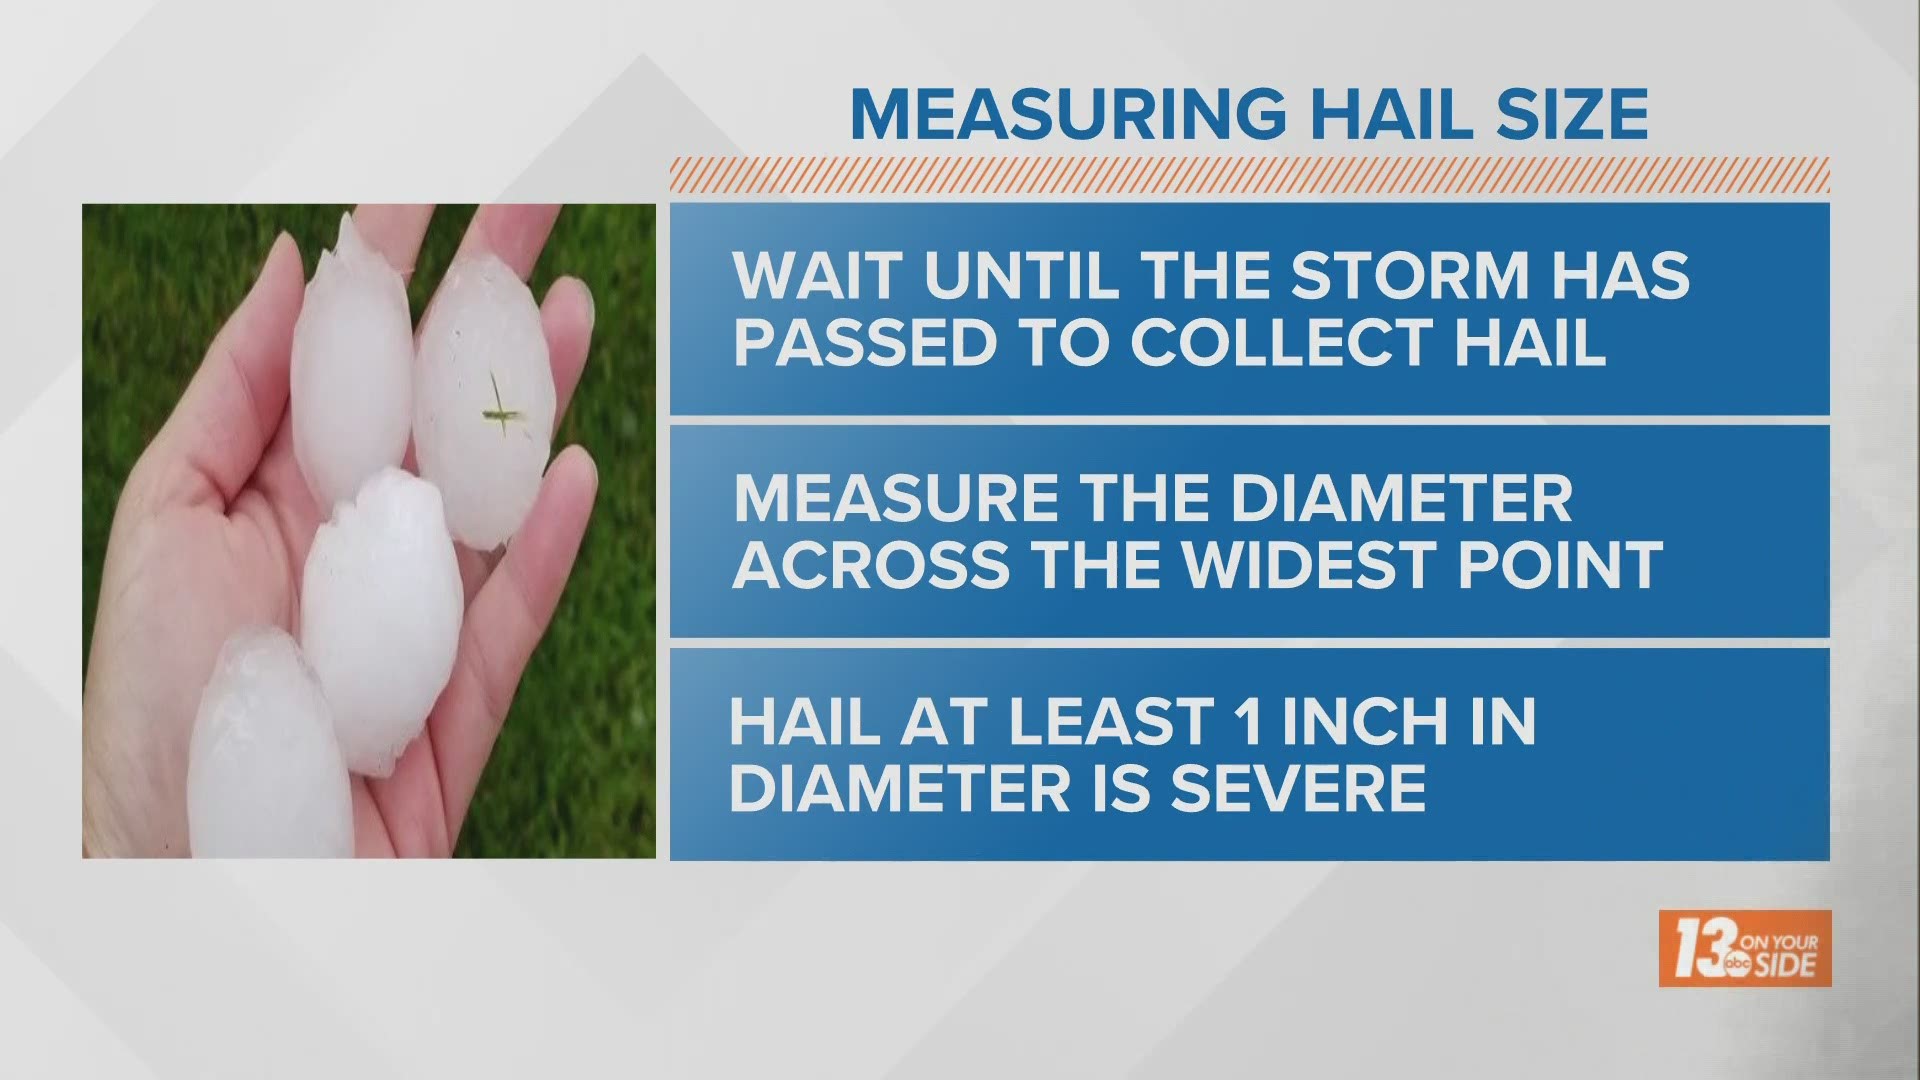 Hail stones can be anywhere between the size of a pea to the size of a grapefruit.